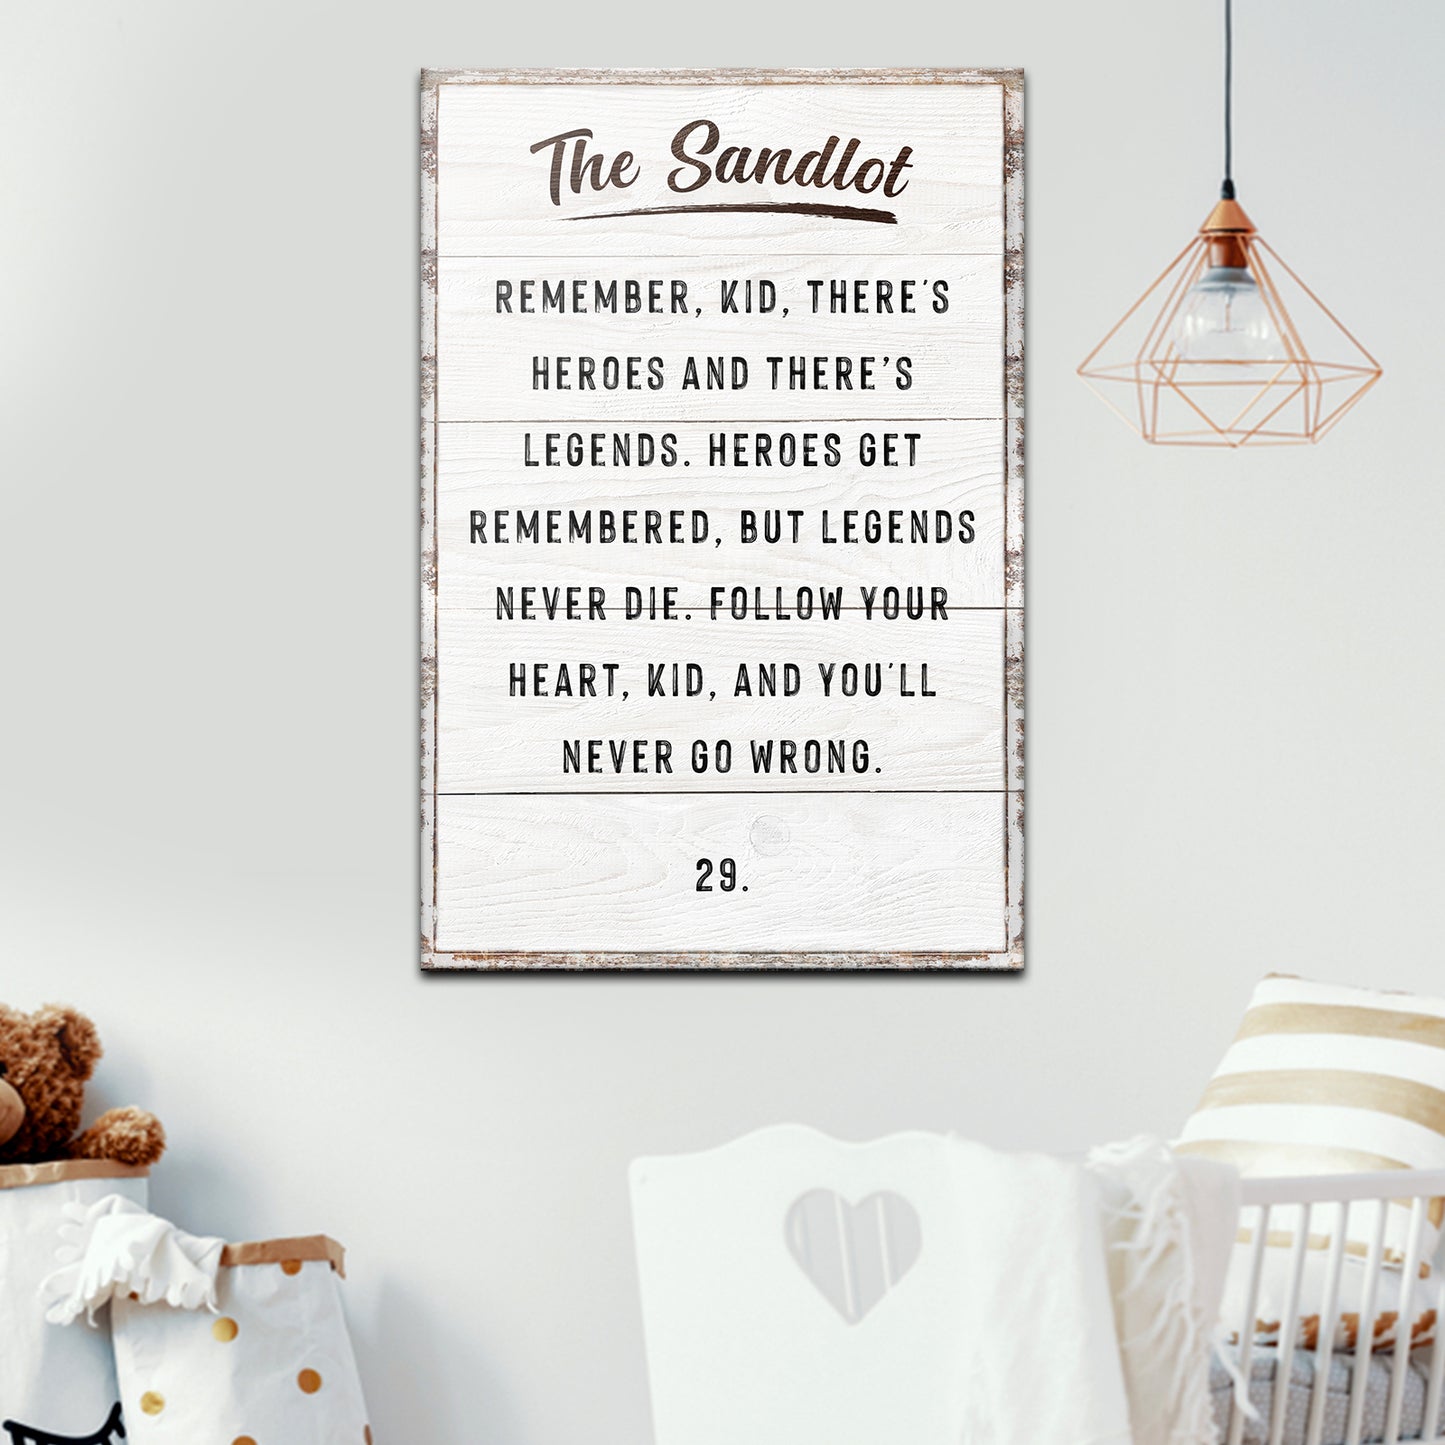 The Sandlot Sign Style 2 - Image by Tailored Canvases